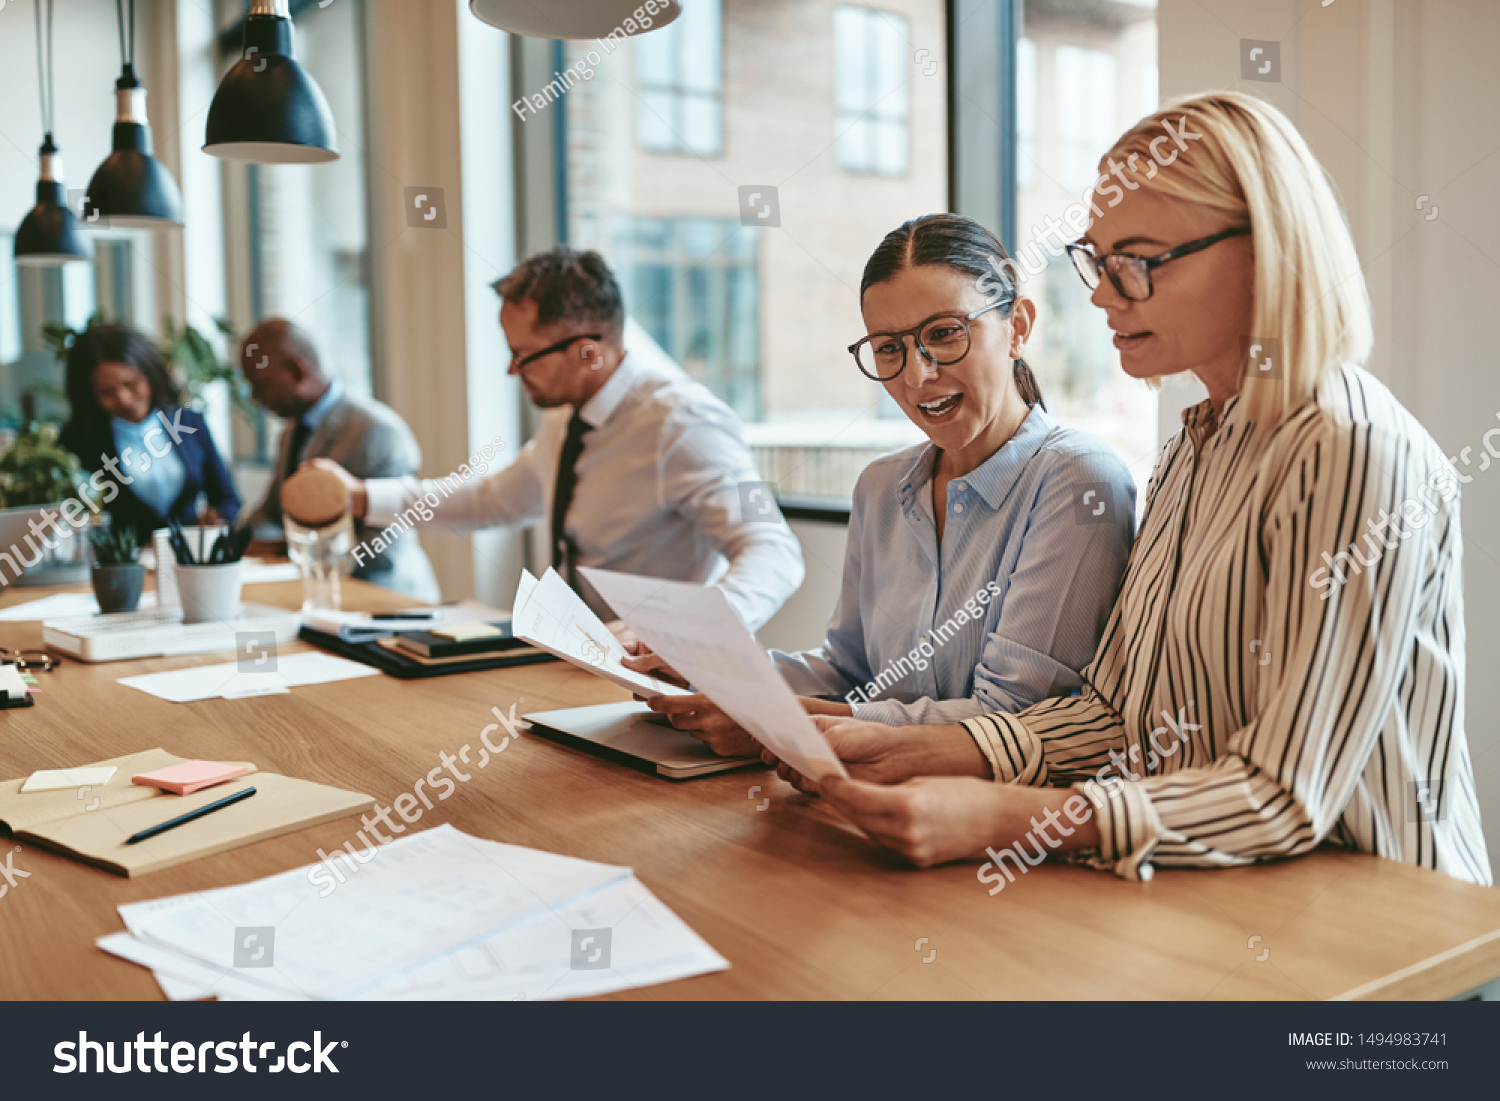 Two smiling young businesswomen reading paperwork together while sitting at a boardroom table during an office meeting #1494983741